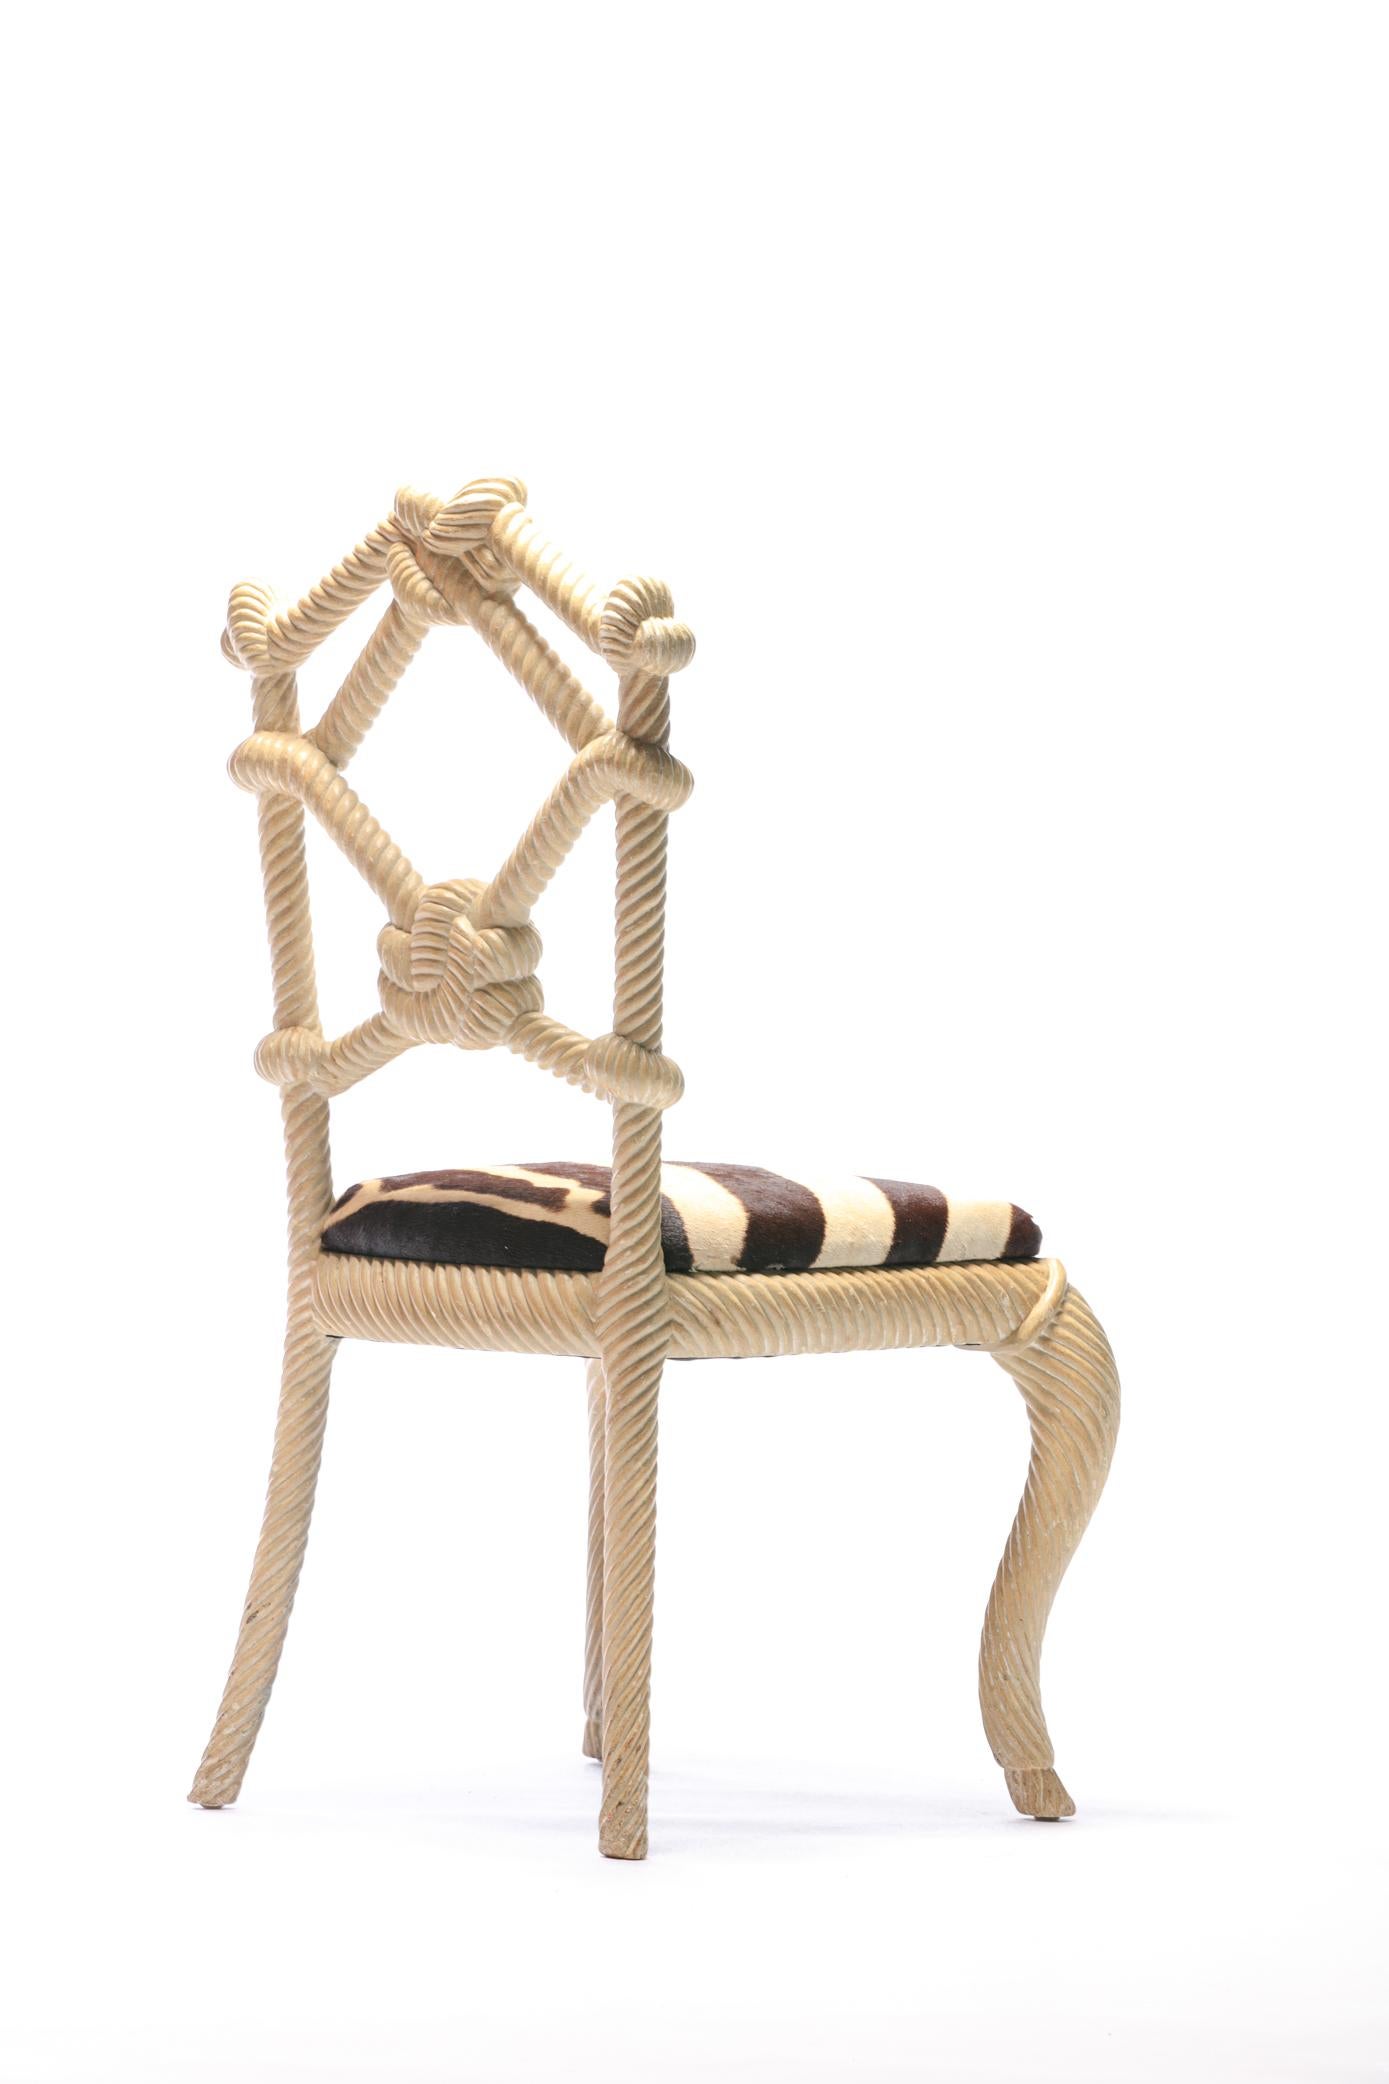 Pair of Rope Chairs from Viceroy Miami with Zebra Hide Upholstered Seats In Good Condition For Sale In Saint Louis, MO